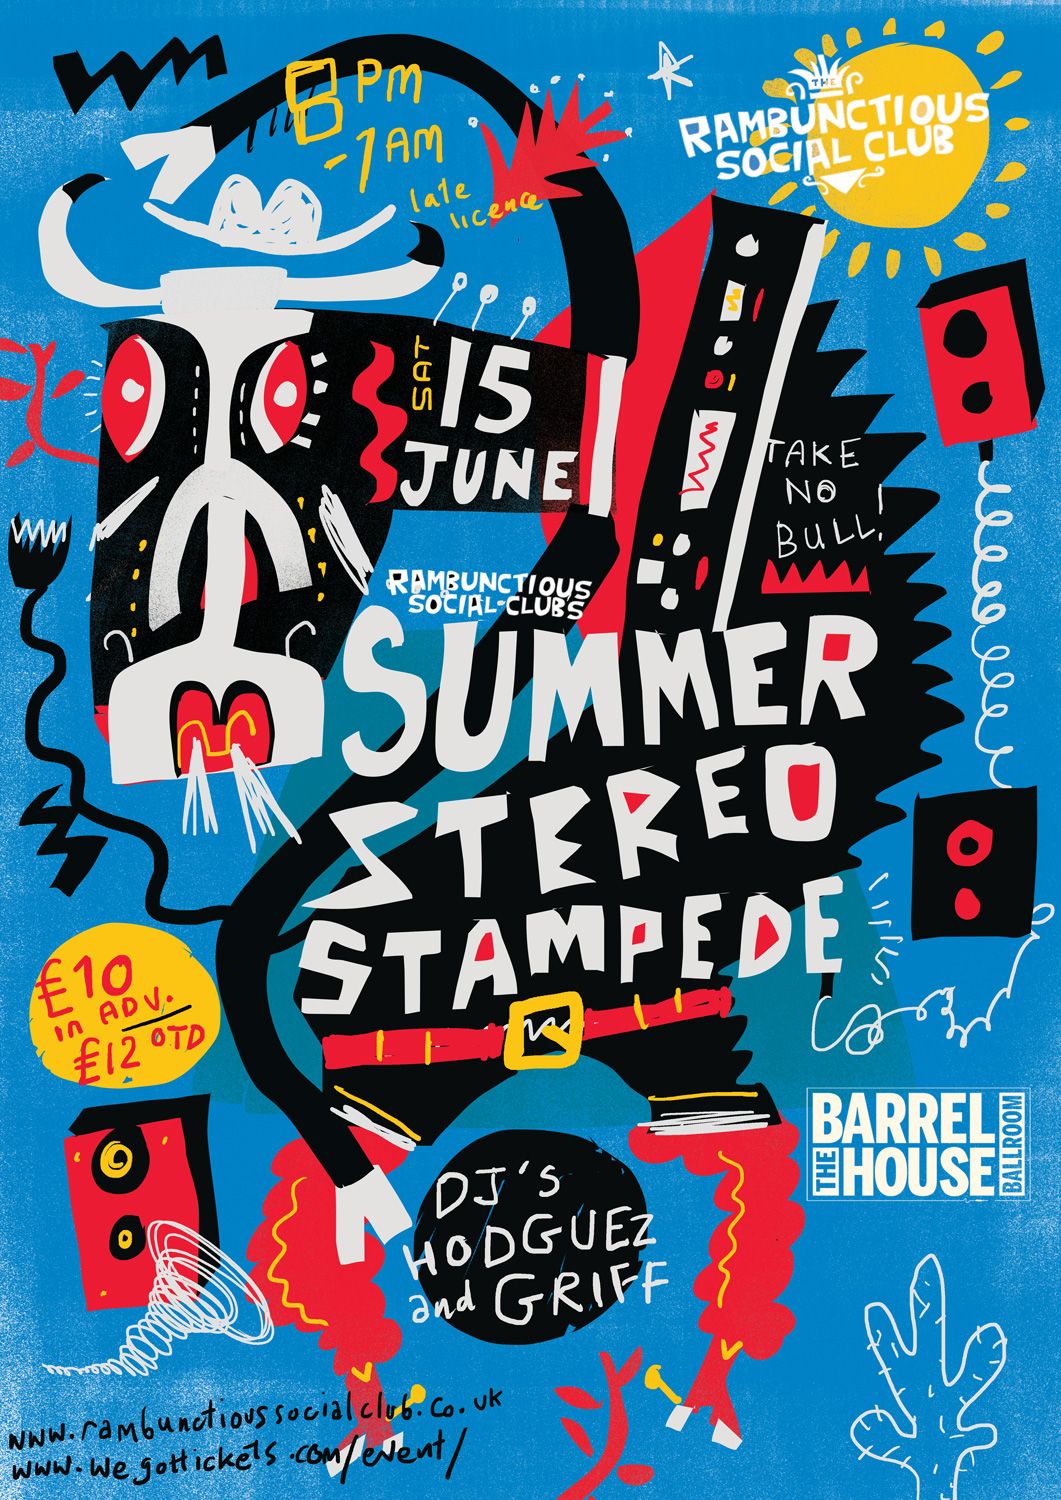 RAMBUNCTIOUS SOCIAL CLUB presents ..... SUMMER STEREO STAMPEDE 